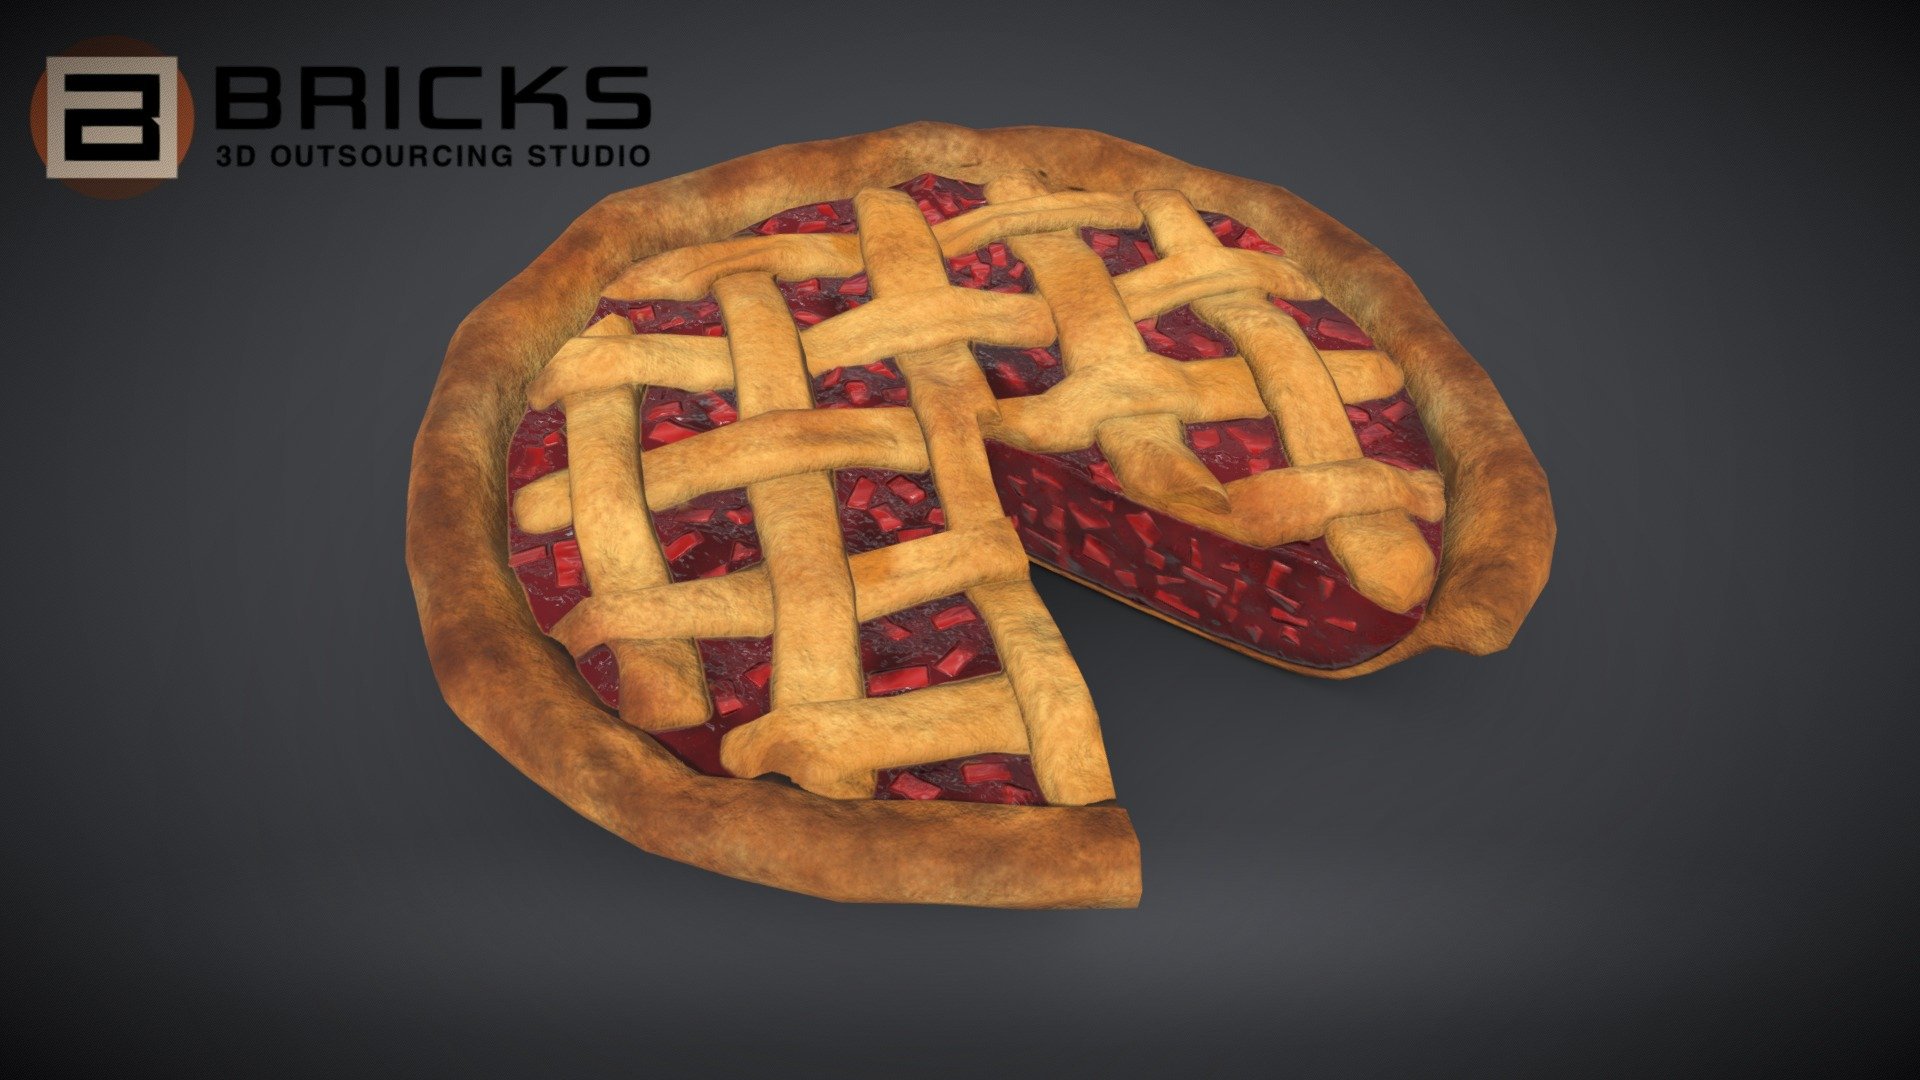 PBR Food Asset:
RhubarbPie_Chart
Polycount: 1526
Vertex count: 765
Texture Size: 2048px x 2048px
Normal: OpenGL

If you need any adjust in file please contact us: team@bricks3dstudio.com

Hire us: tringuyen@bricks3dstudio.com
Here is us: https://www.bricks3dstudio.com/
        https://www.artstation.com/bricksstudio
        https://www.facebook.com/Bricks3dstudio/
        https://www.linkedin.com/in/bricks-studio-b10462252/ - Rhubarb PieChart - Buy Royalty Free 3D model by Bricks Studio (@bricks3dstudio) 3d model